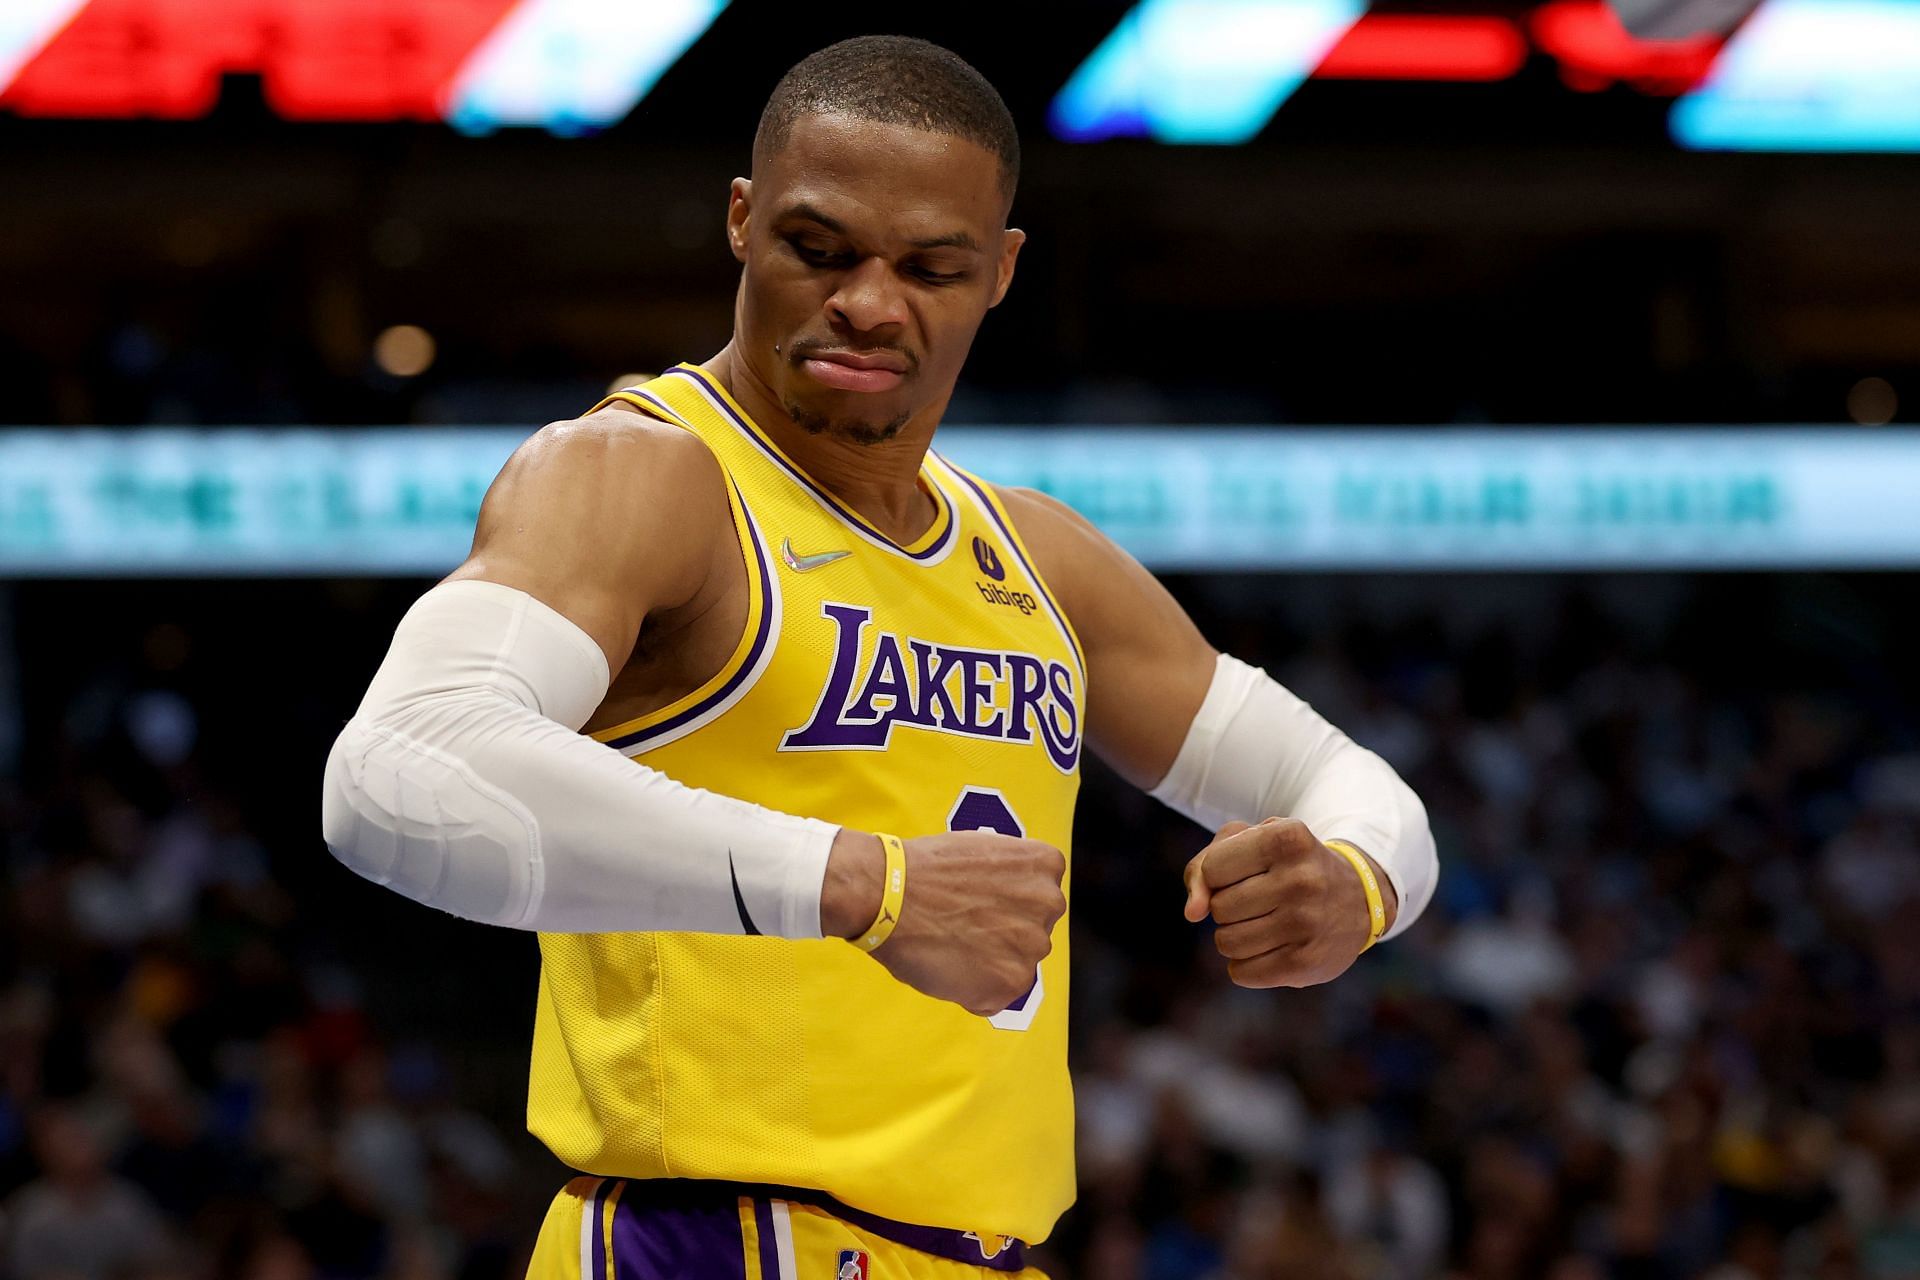 Russell Westbrook of the LA Lakers.